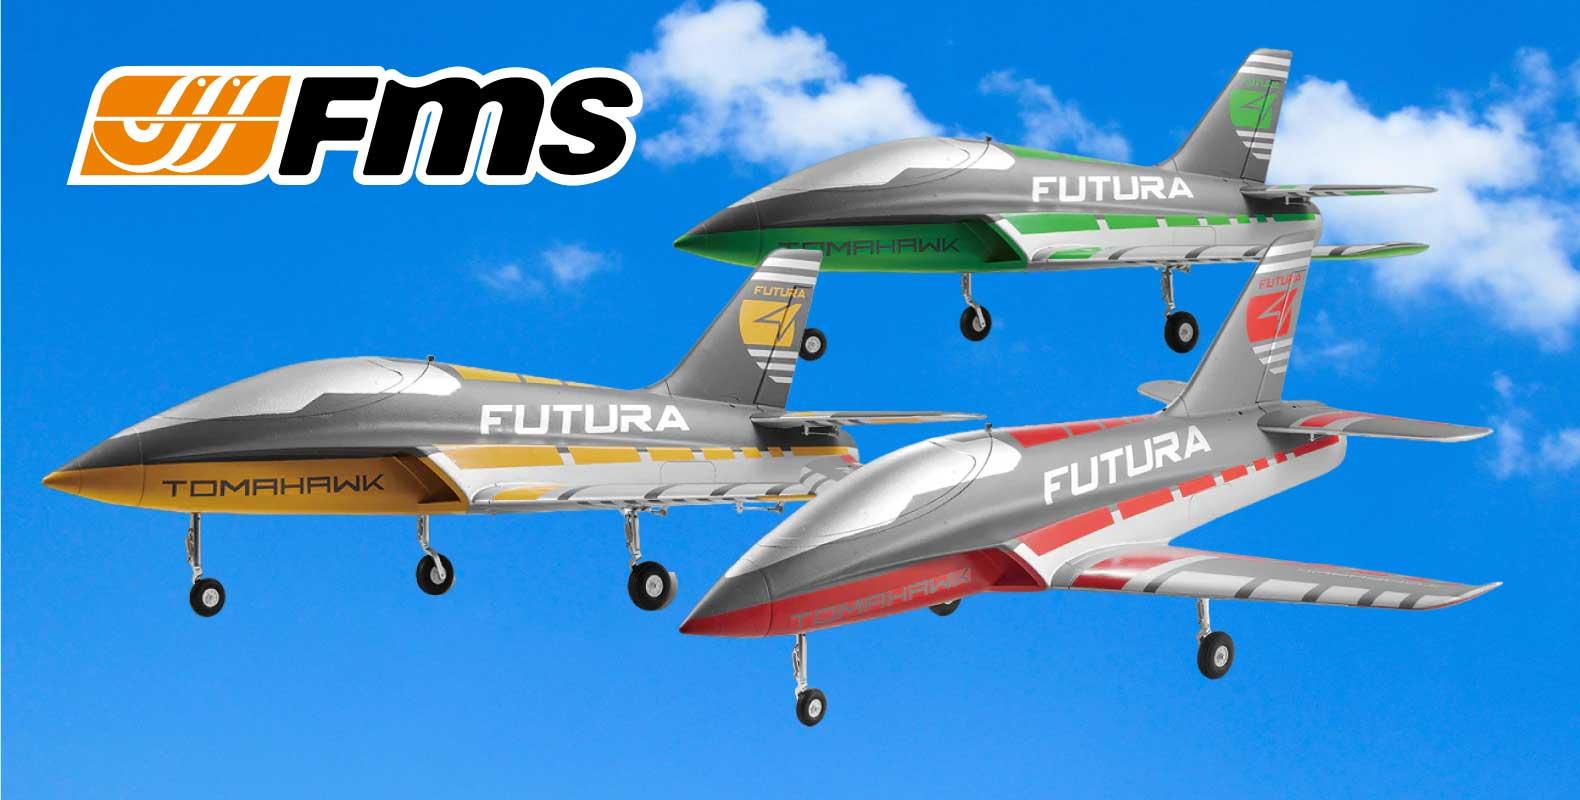 Jet Powered Rc Planes For Sale: Why jet-powered RC planes are a must-have for all remote control enthusiasts